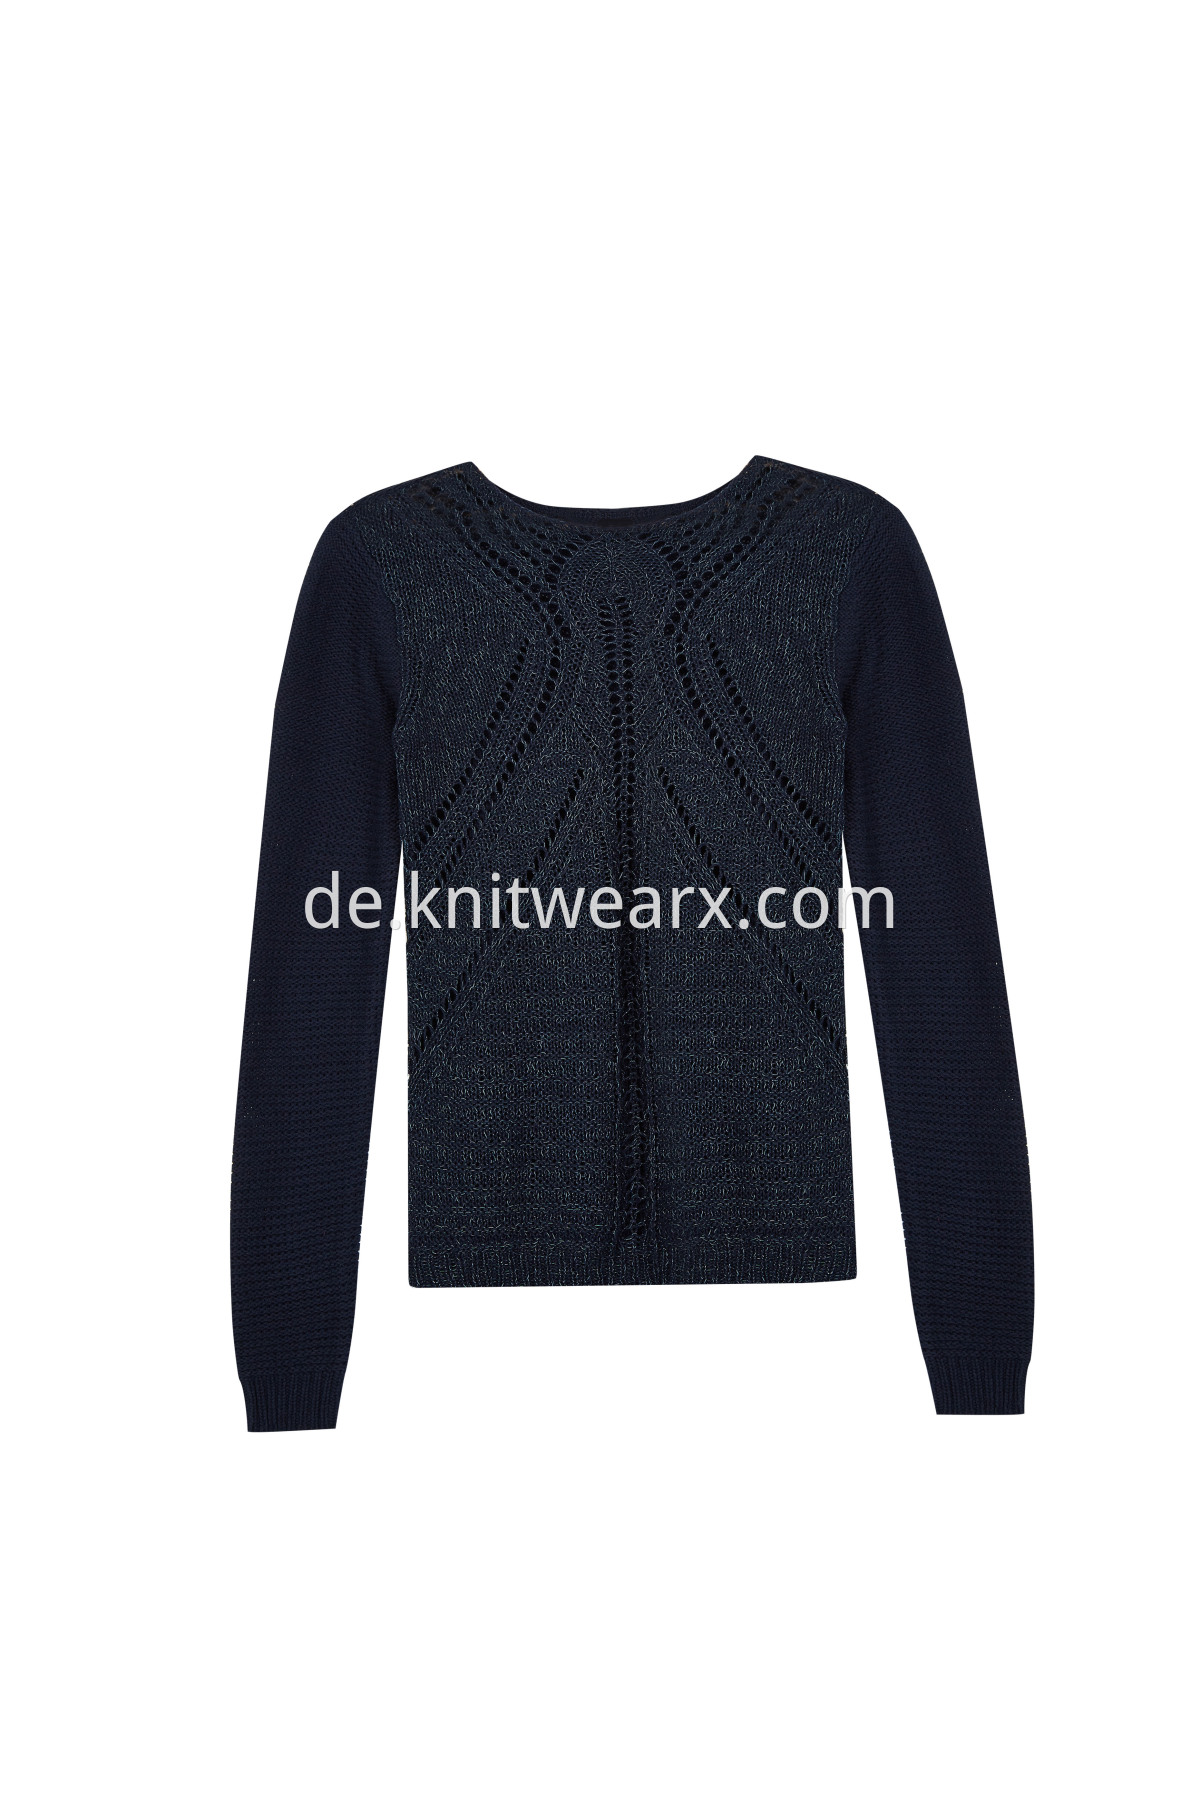 Women‘s Boat Batwing Rib Sleeve knitted Pullover